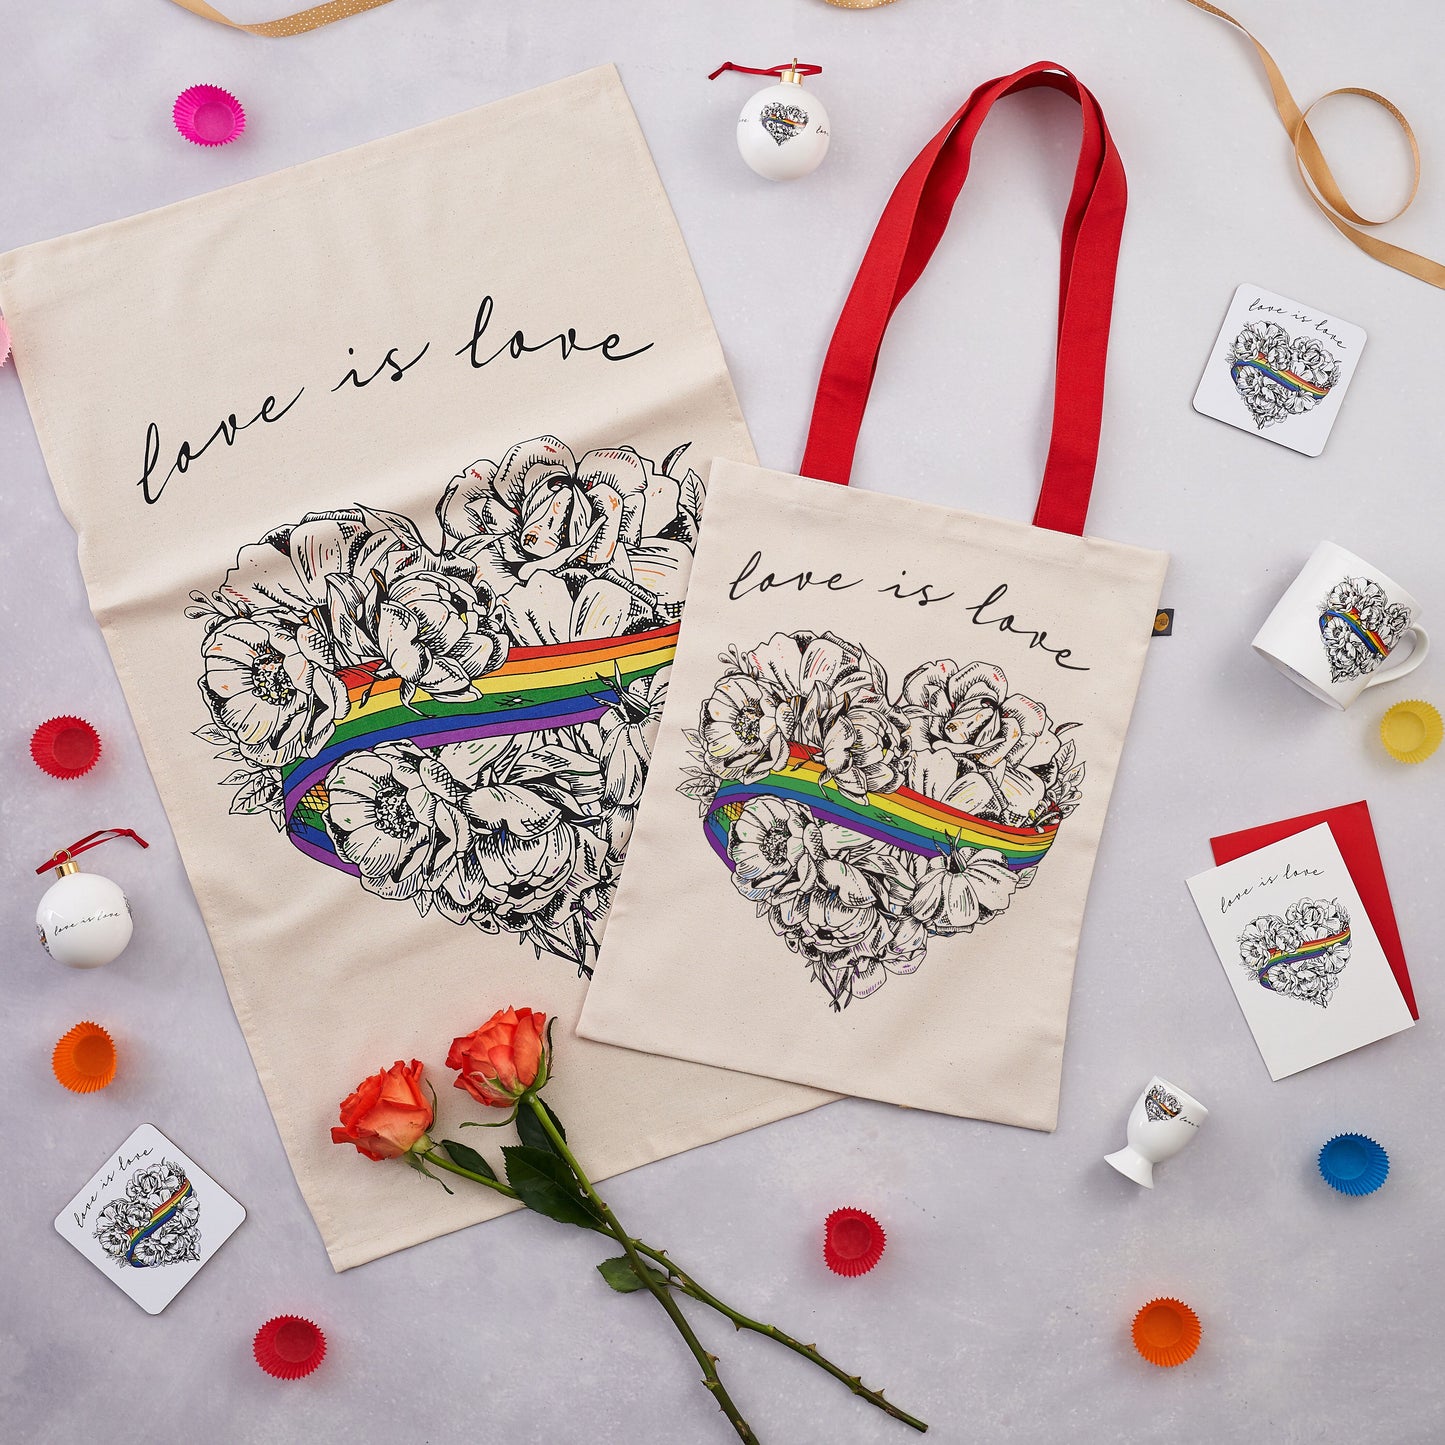 Love is Love, LGBTQ, Gay Pride, Canvas bag, tote bag, shopper bag,, rainbow, heart, roses, hand decorated, handmade in Britain, Victoria Eggs. Rainbow, roses, heart shaped, illustration.